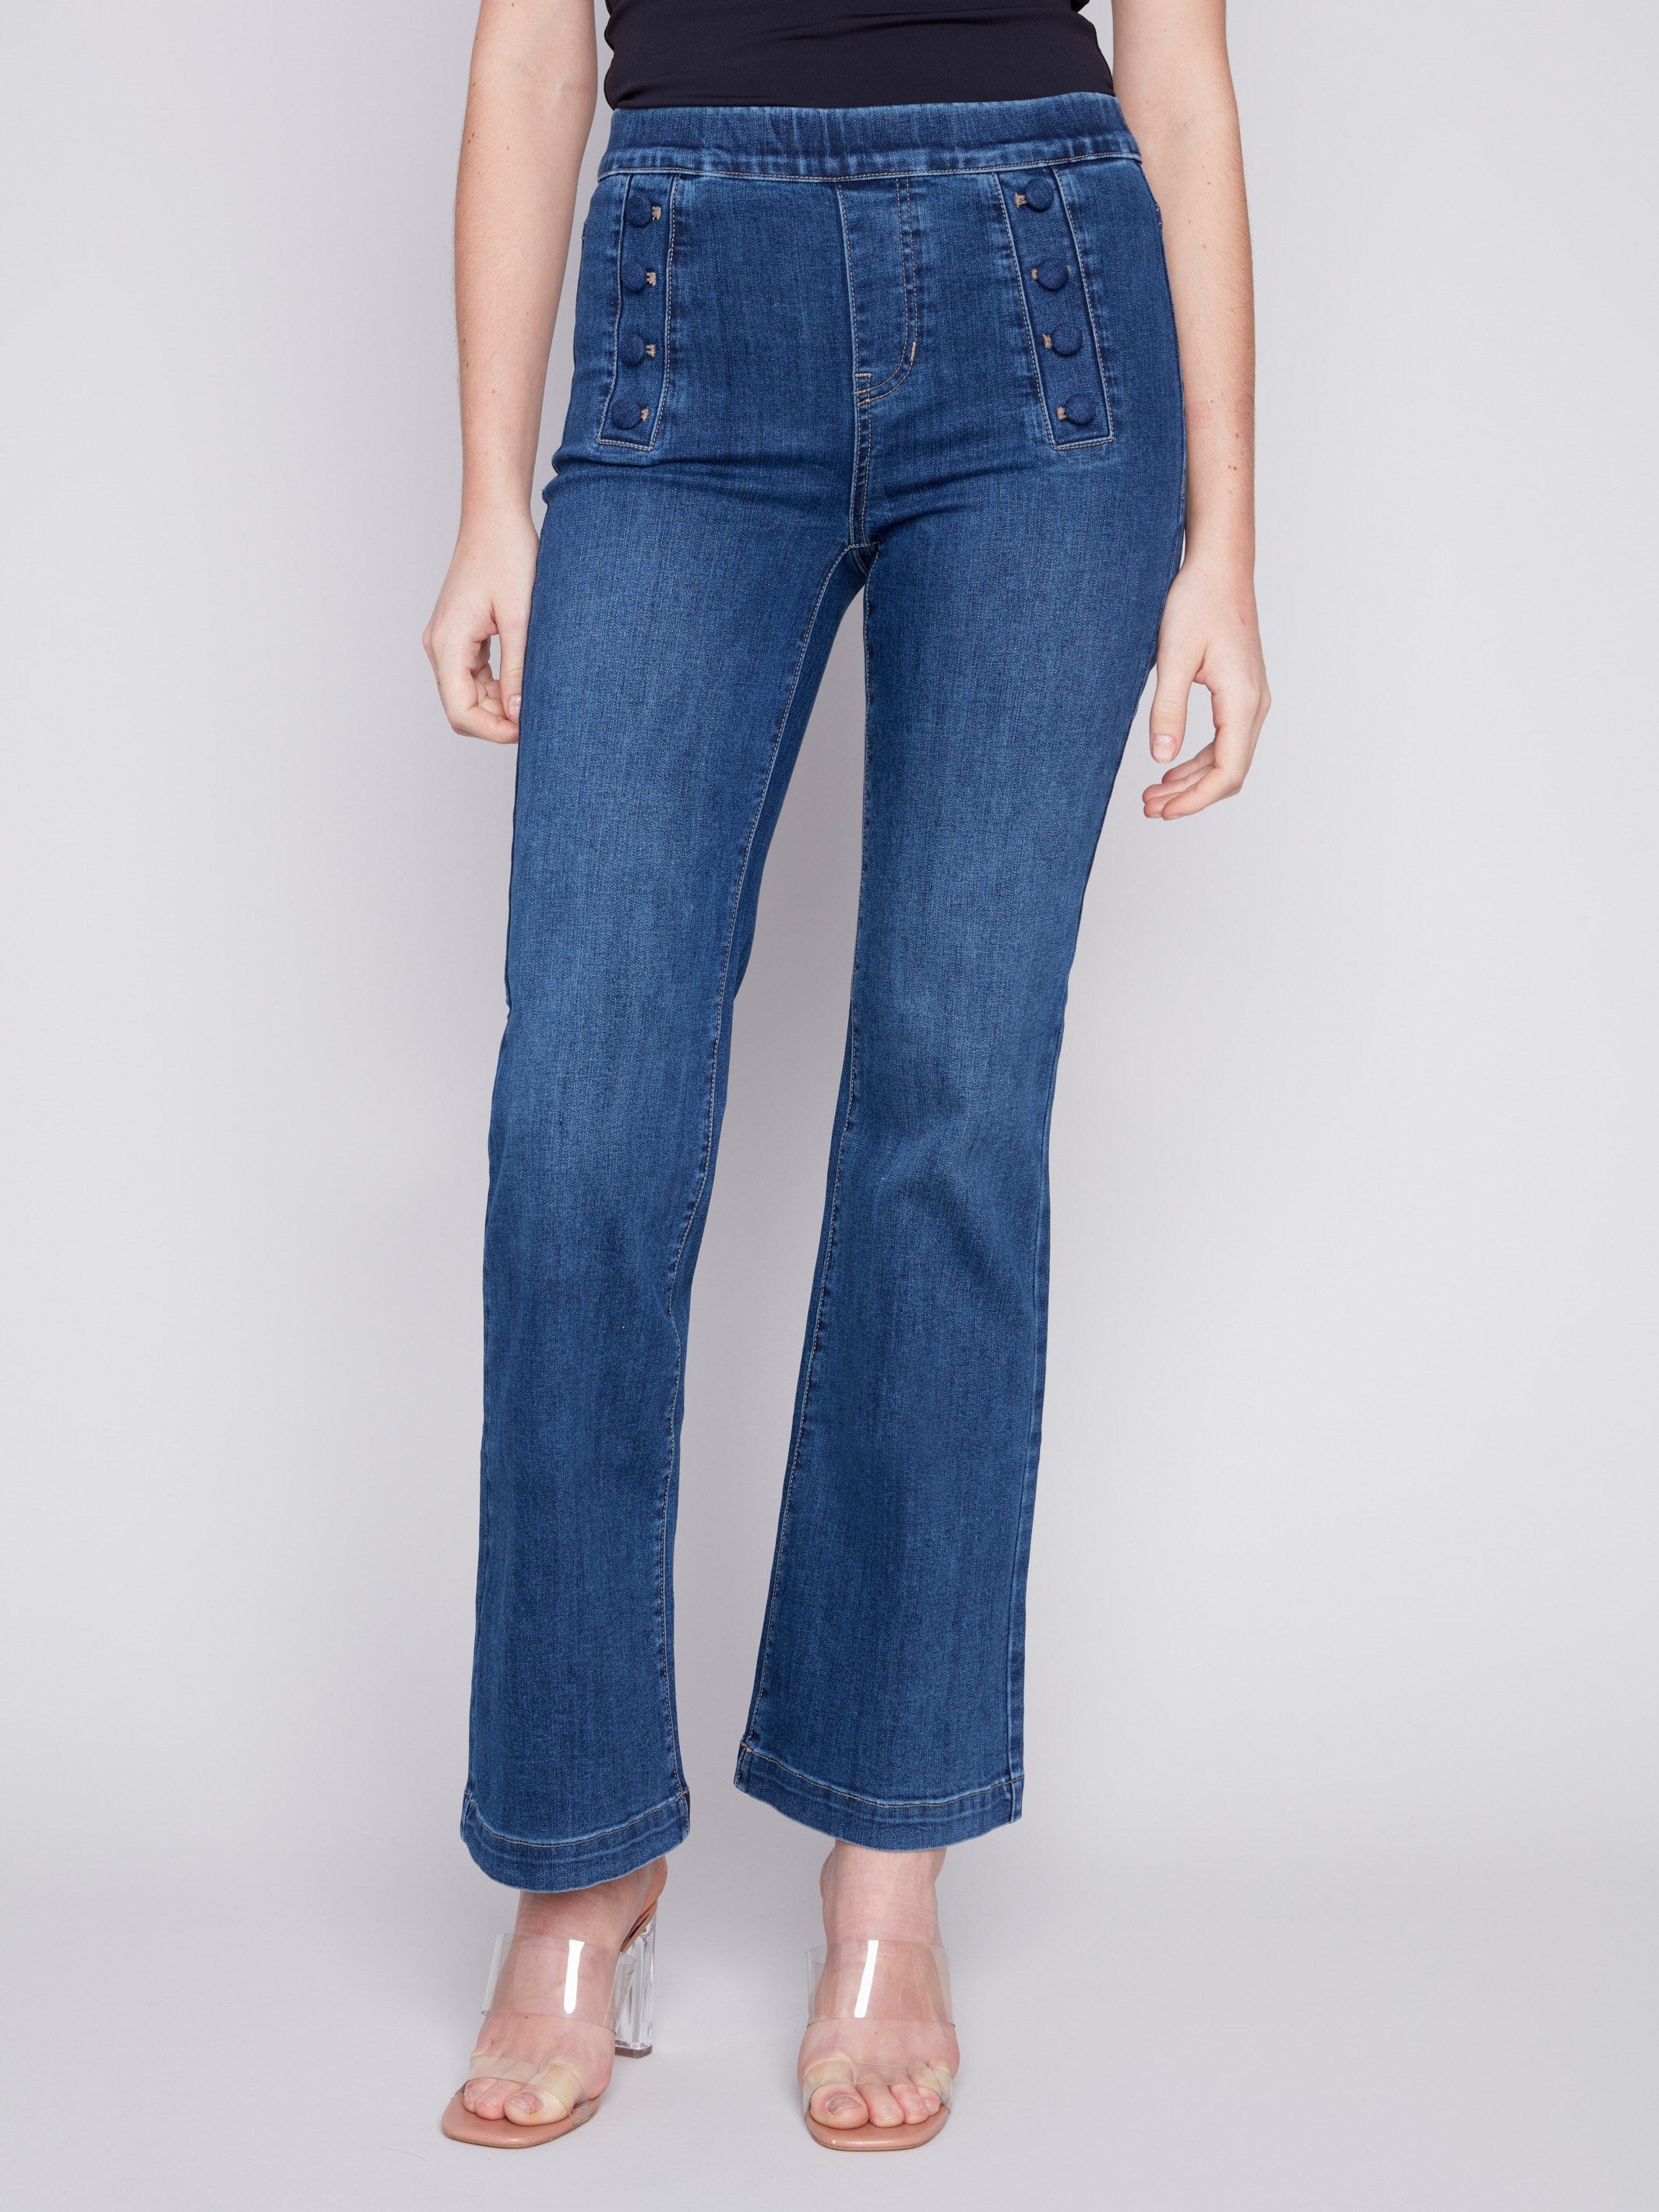 Flare Jeans with Decorative Buttons - Indigo - Charlie B Collection Canada - Image 2